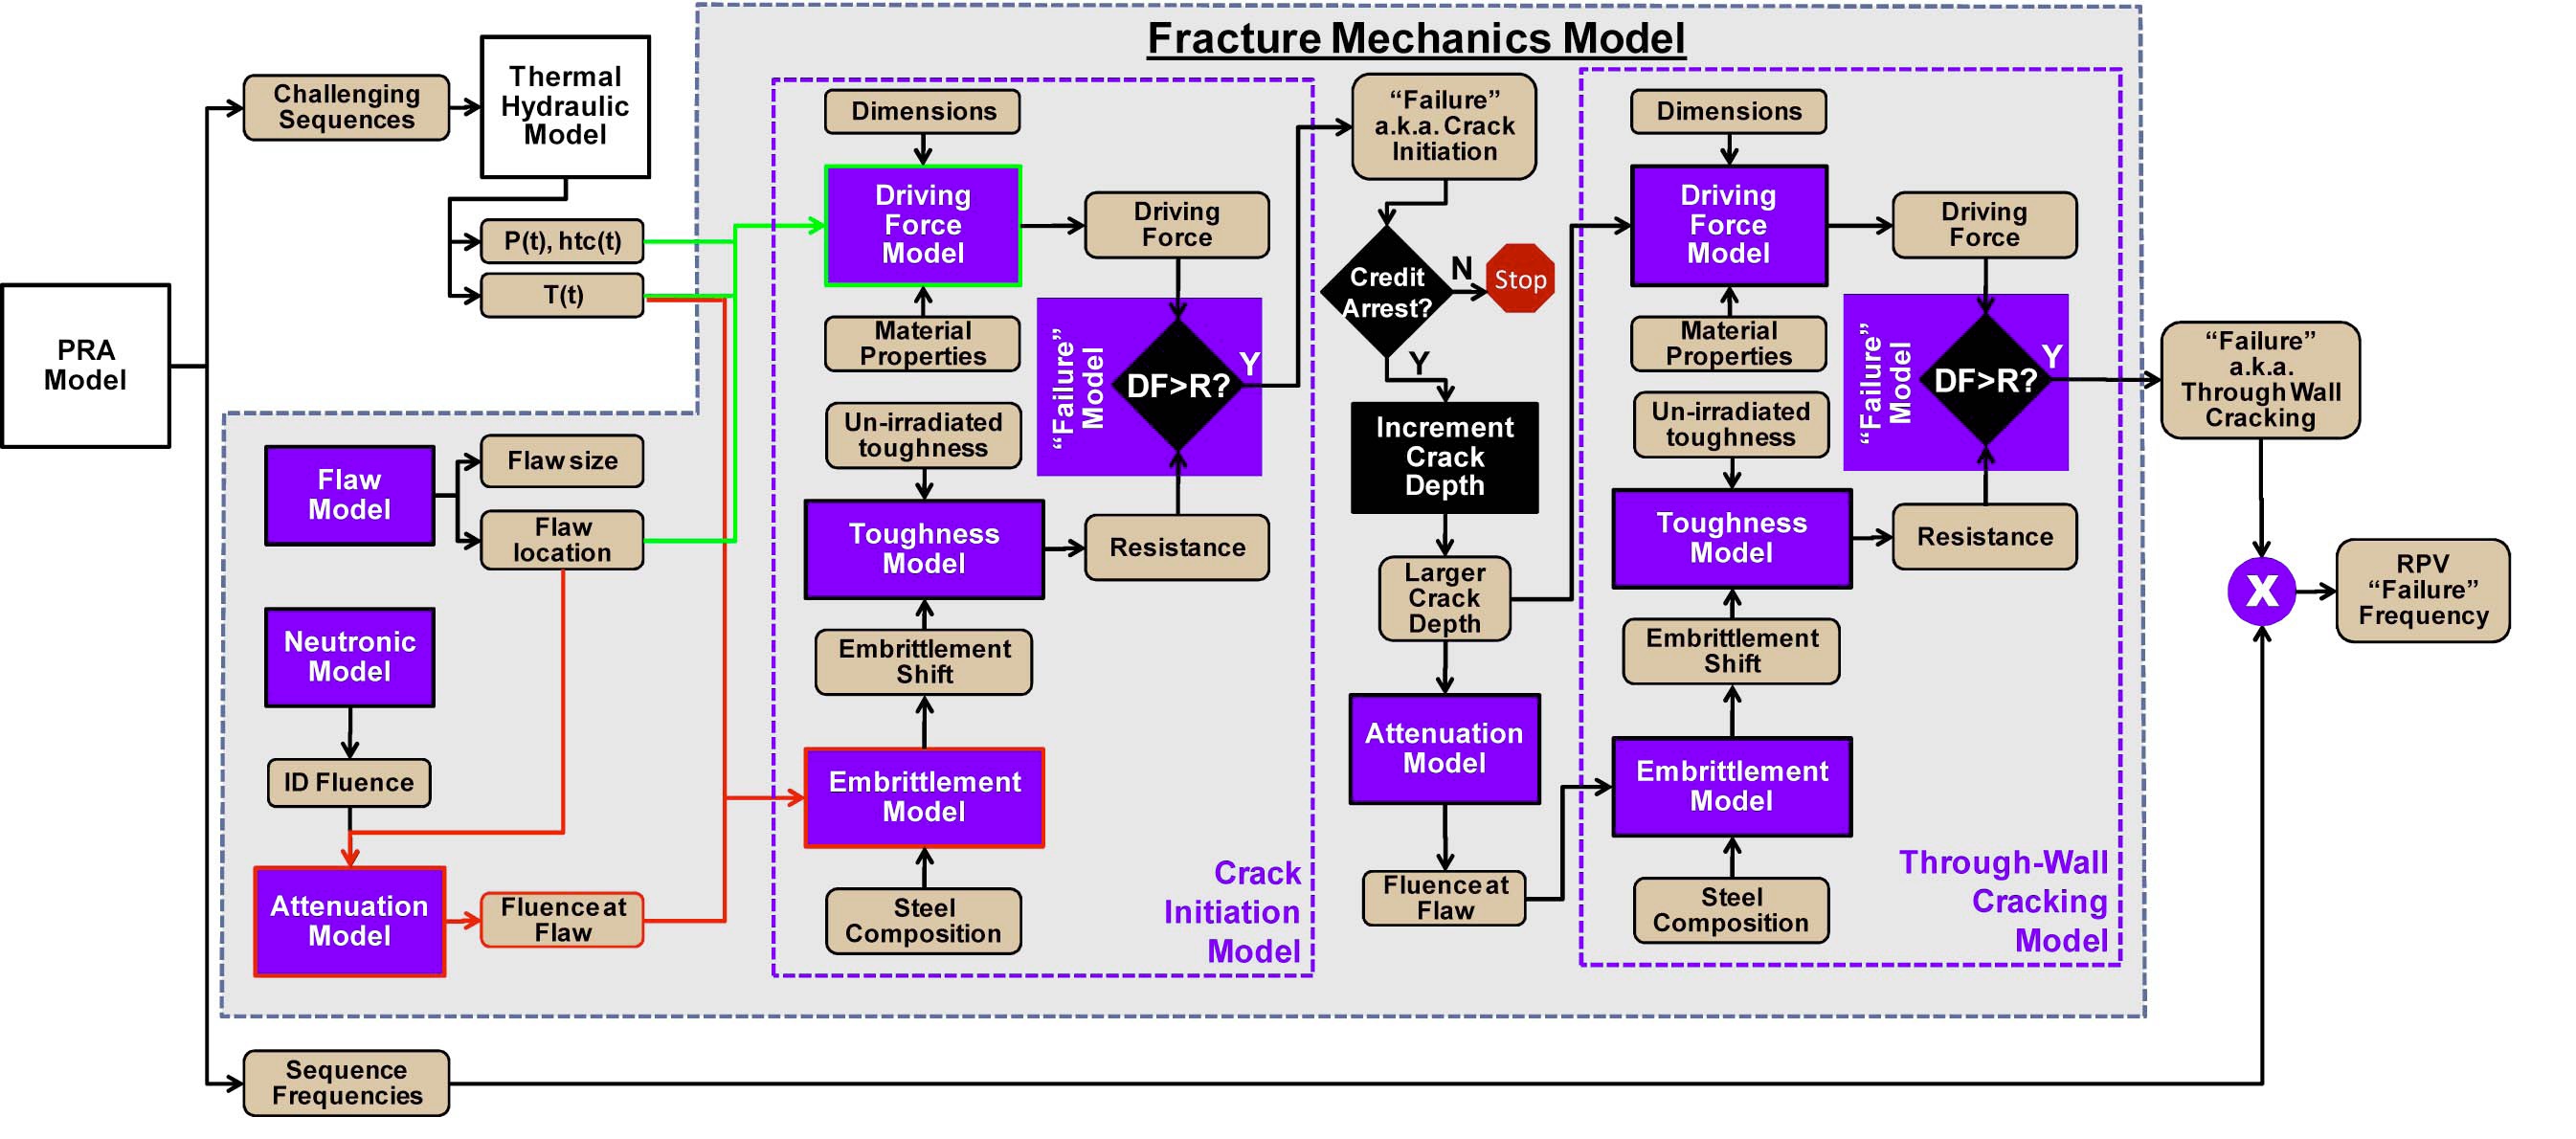 Schematic Showing the Sub-models and Information flow within that the Fracture Mechanics Model.